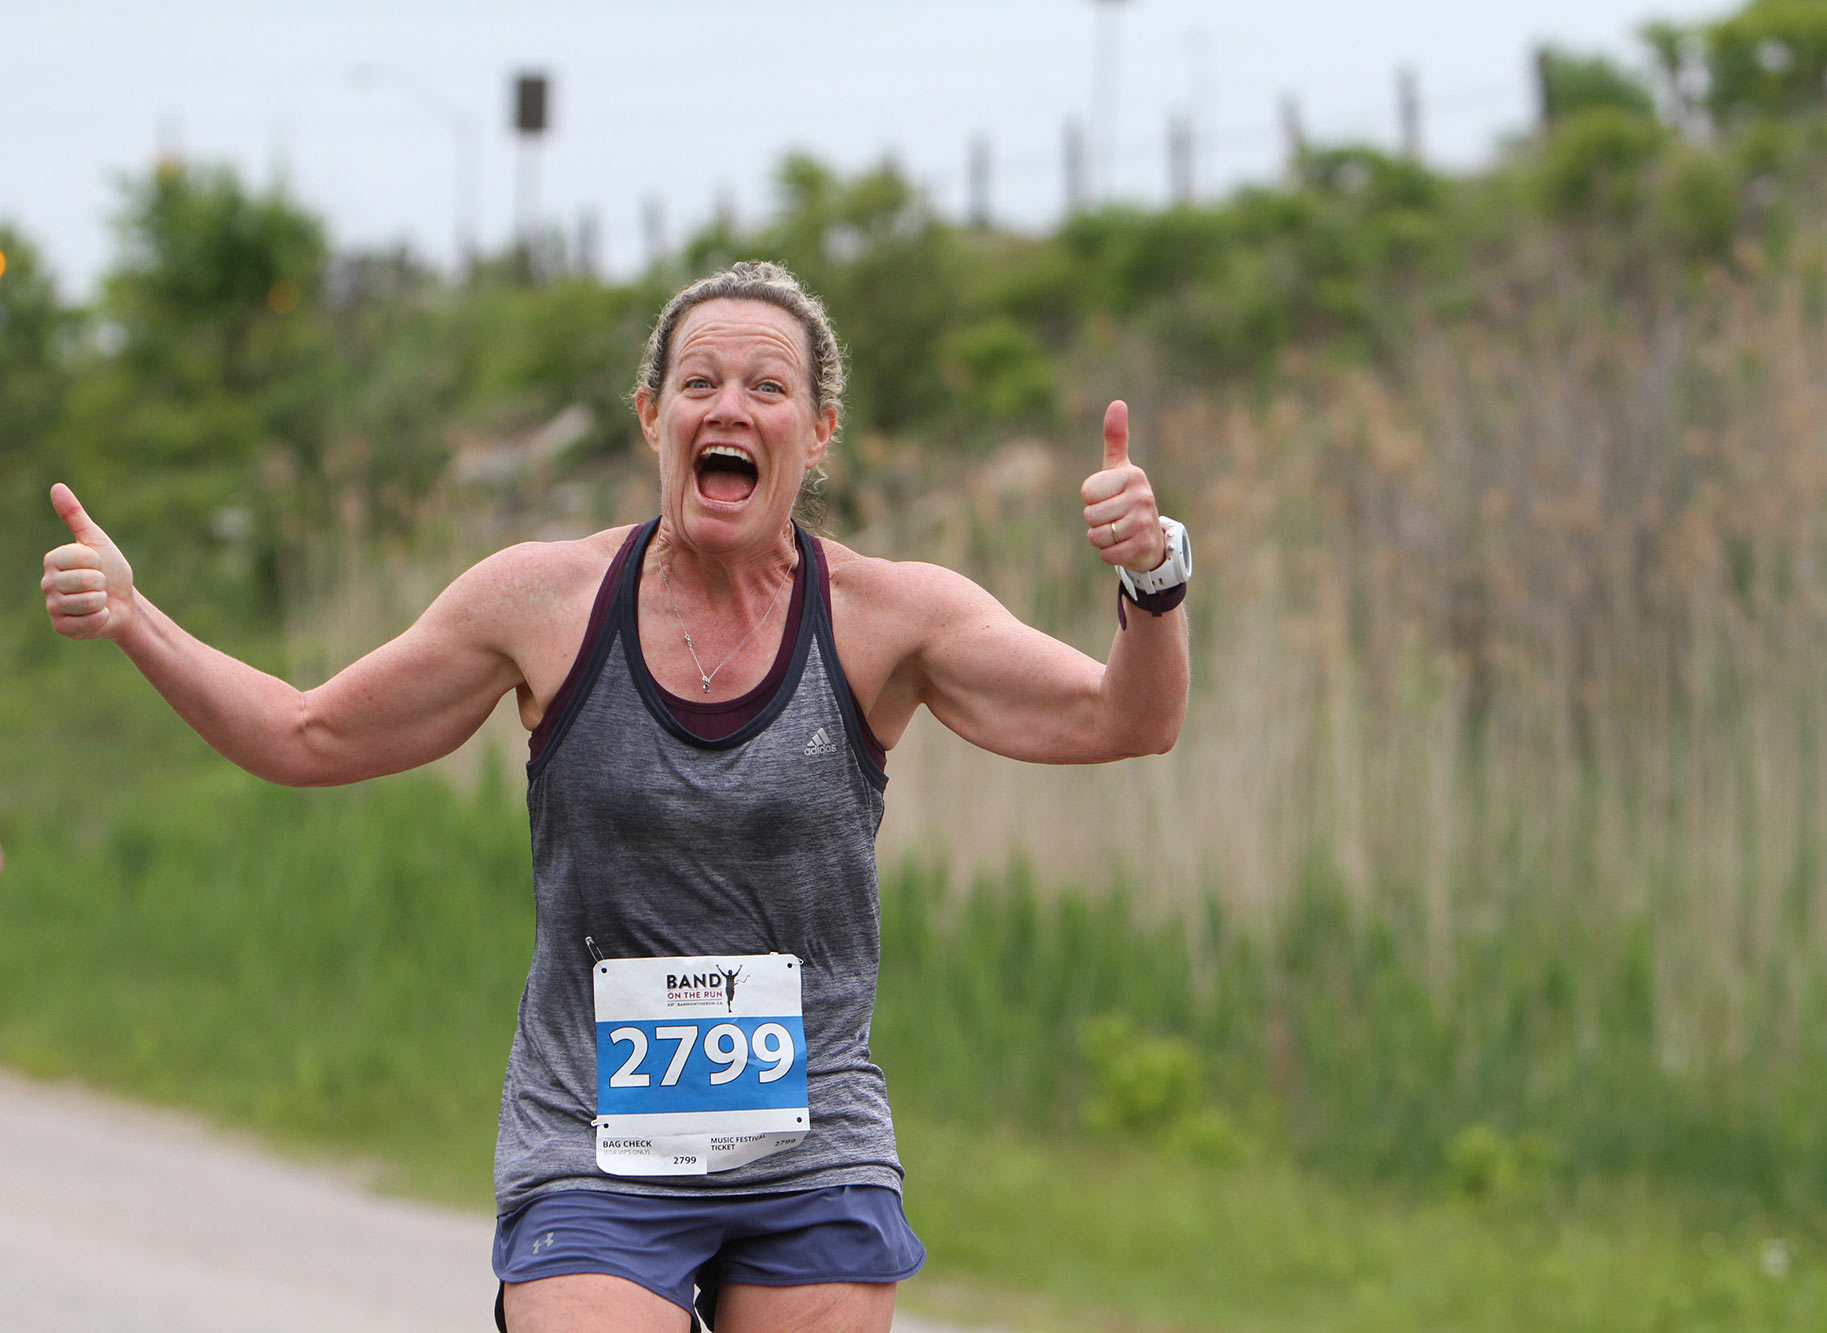 The most fun you will have at a running event